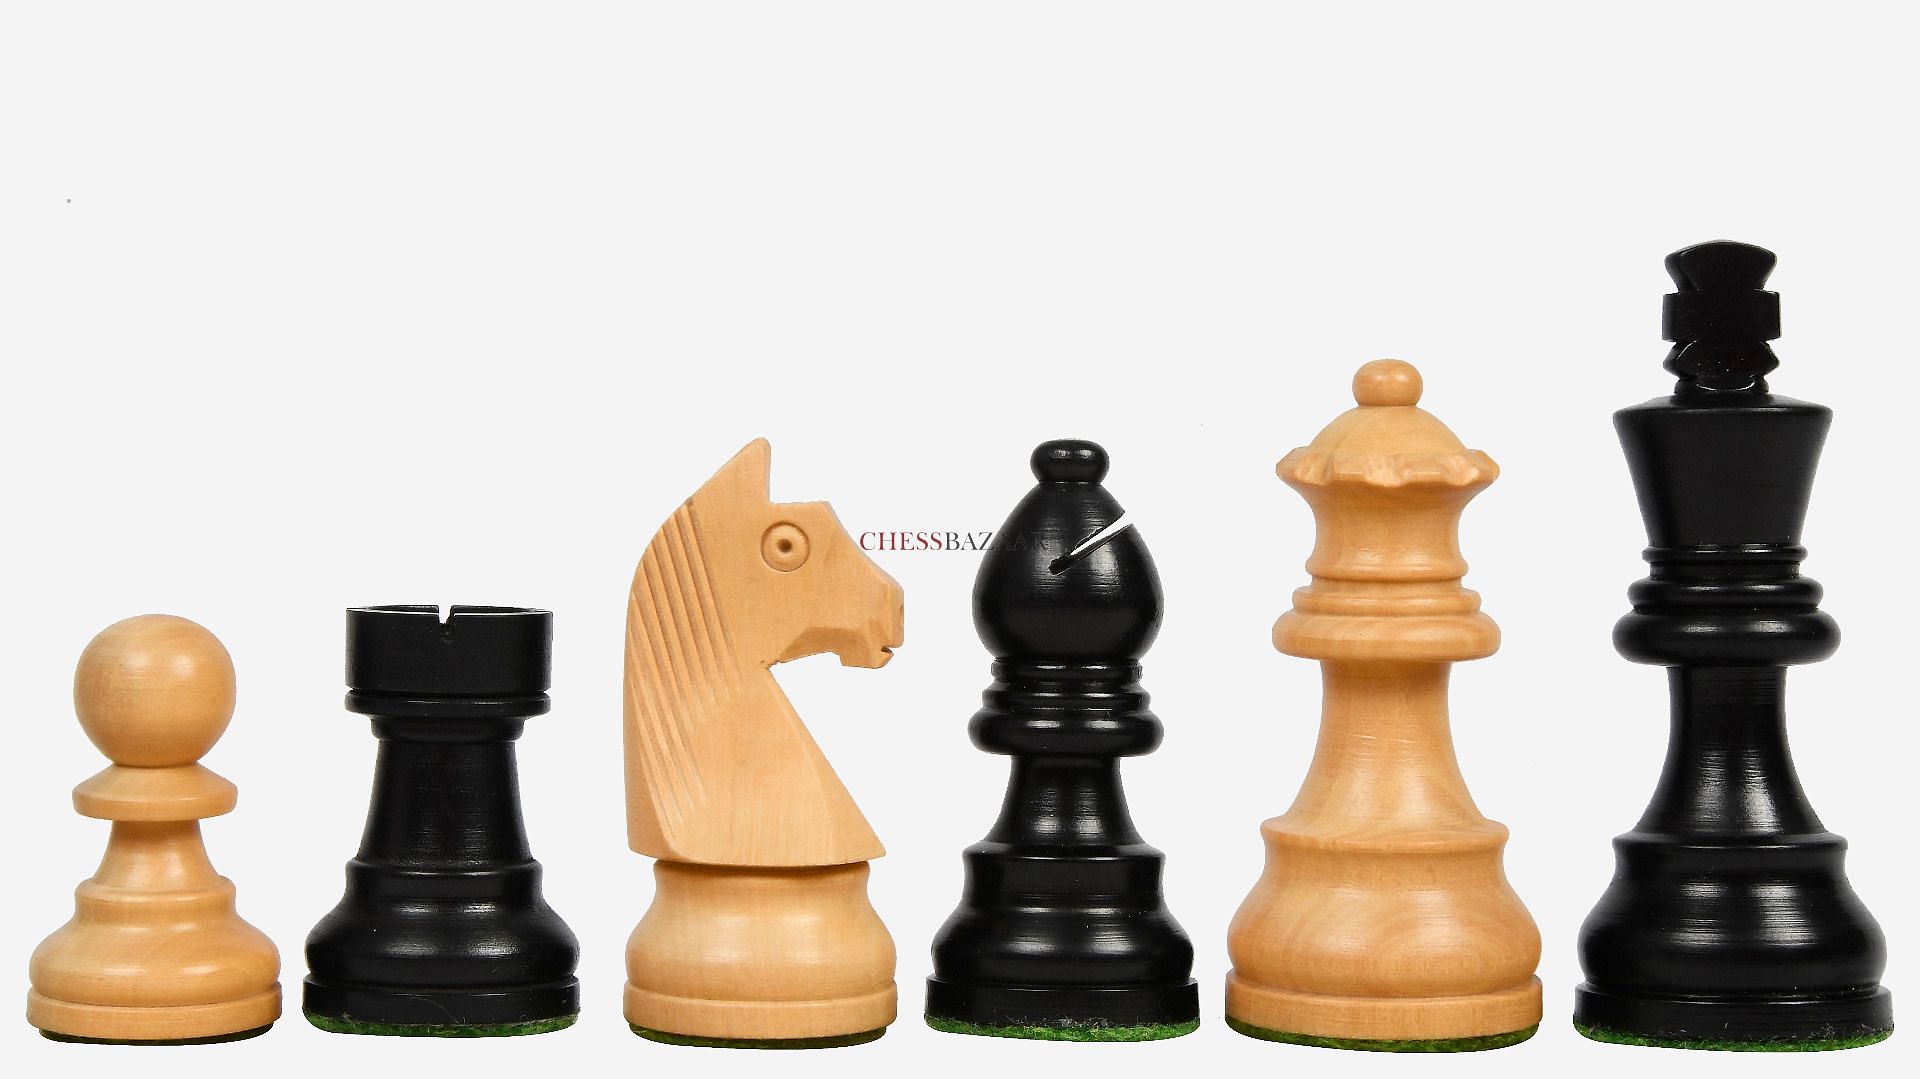 Best Value Tournament Chess Set - Staunton Chess Pieces and Green Roll-Up 1